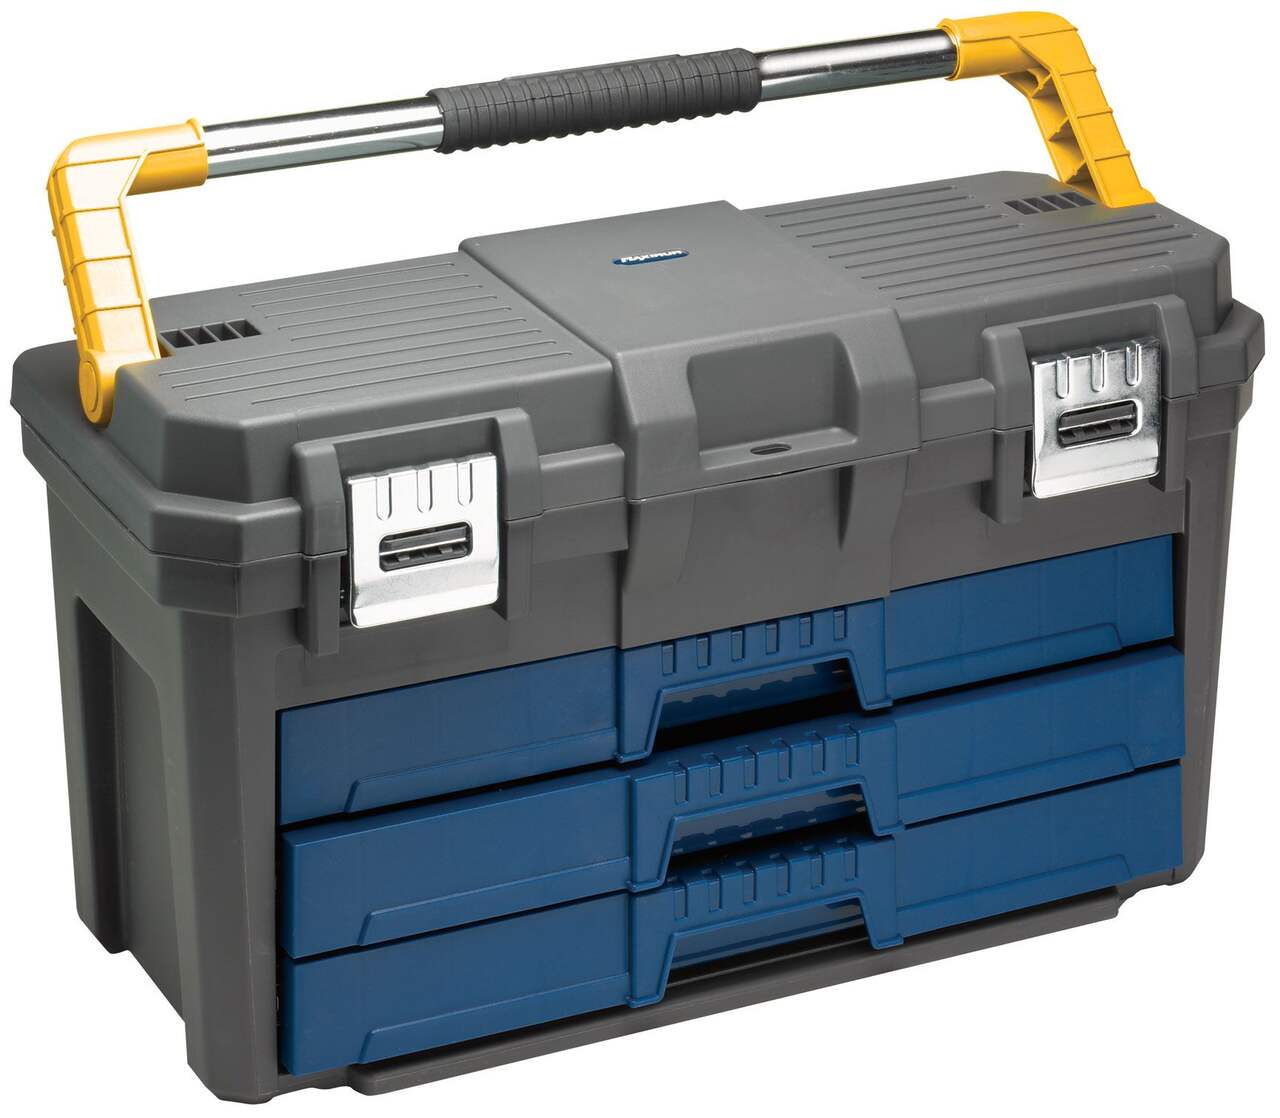 https://media-www.canadiantire.ca/product/fixing/tools/tool-storage/0580847/mastercraft-maximum-23-toolbox-with-3-drawers-421c2c03-b750-4399-af74-4283a8c83dc4-jpgrendition.jpg?imdensity=1&imwidth=640&impolicy=mZoom